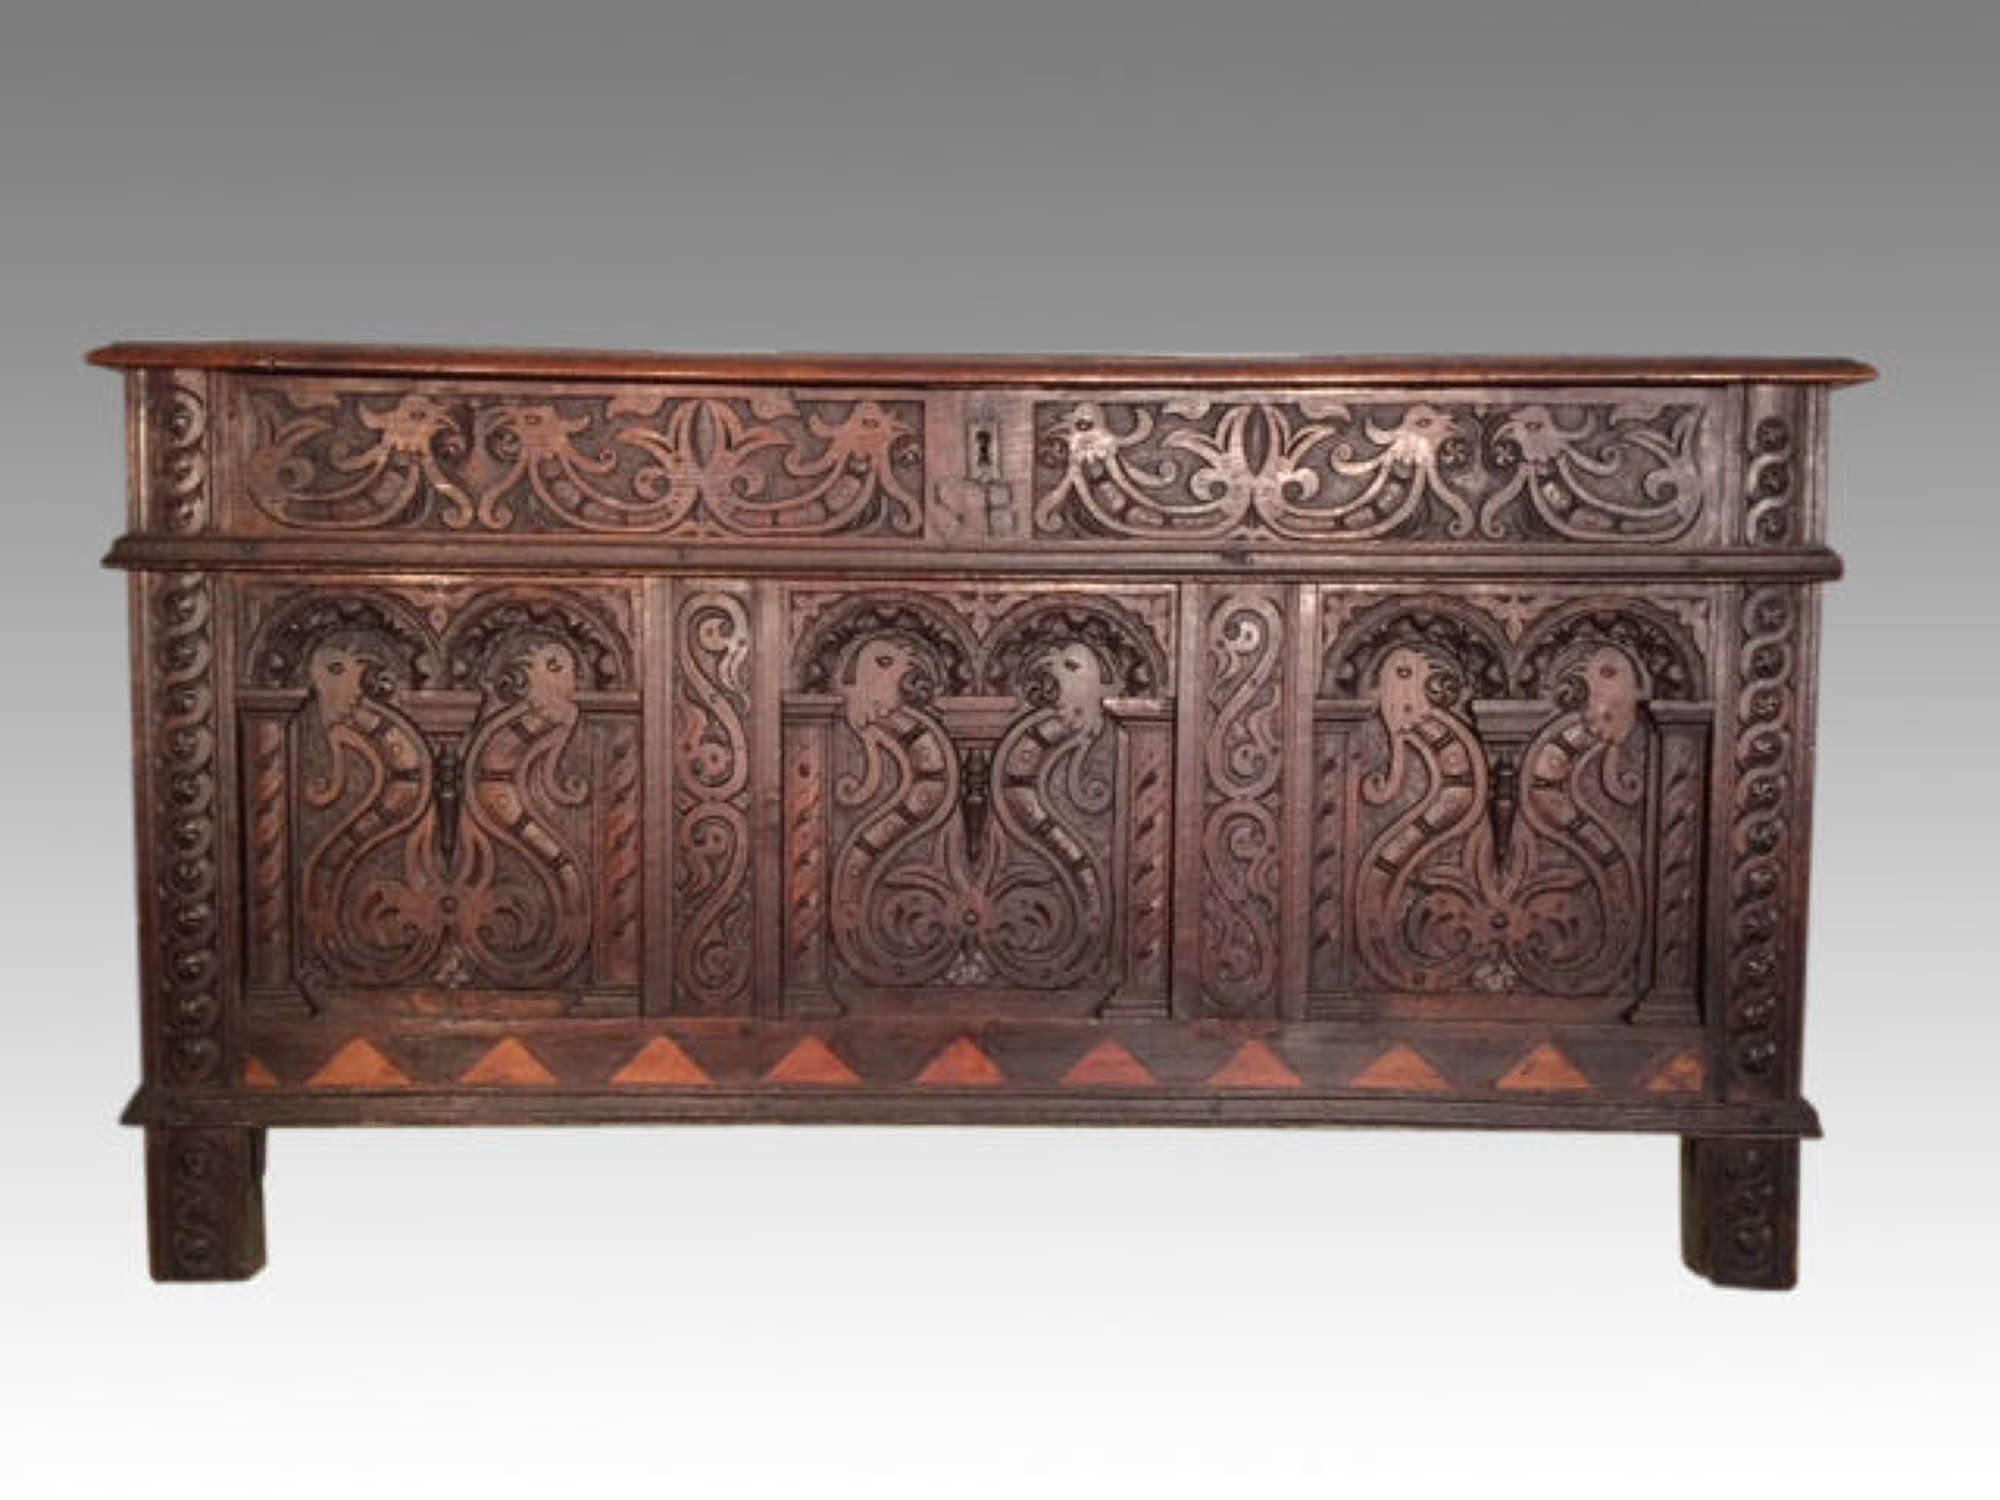 17th century antique carved oak arcaded front coffer.